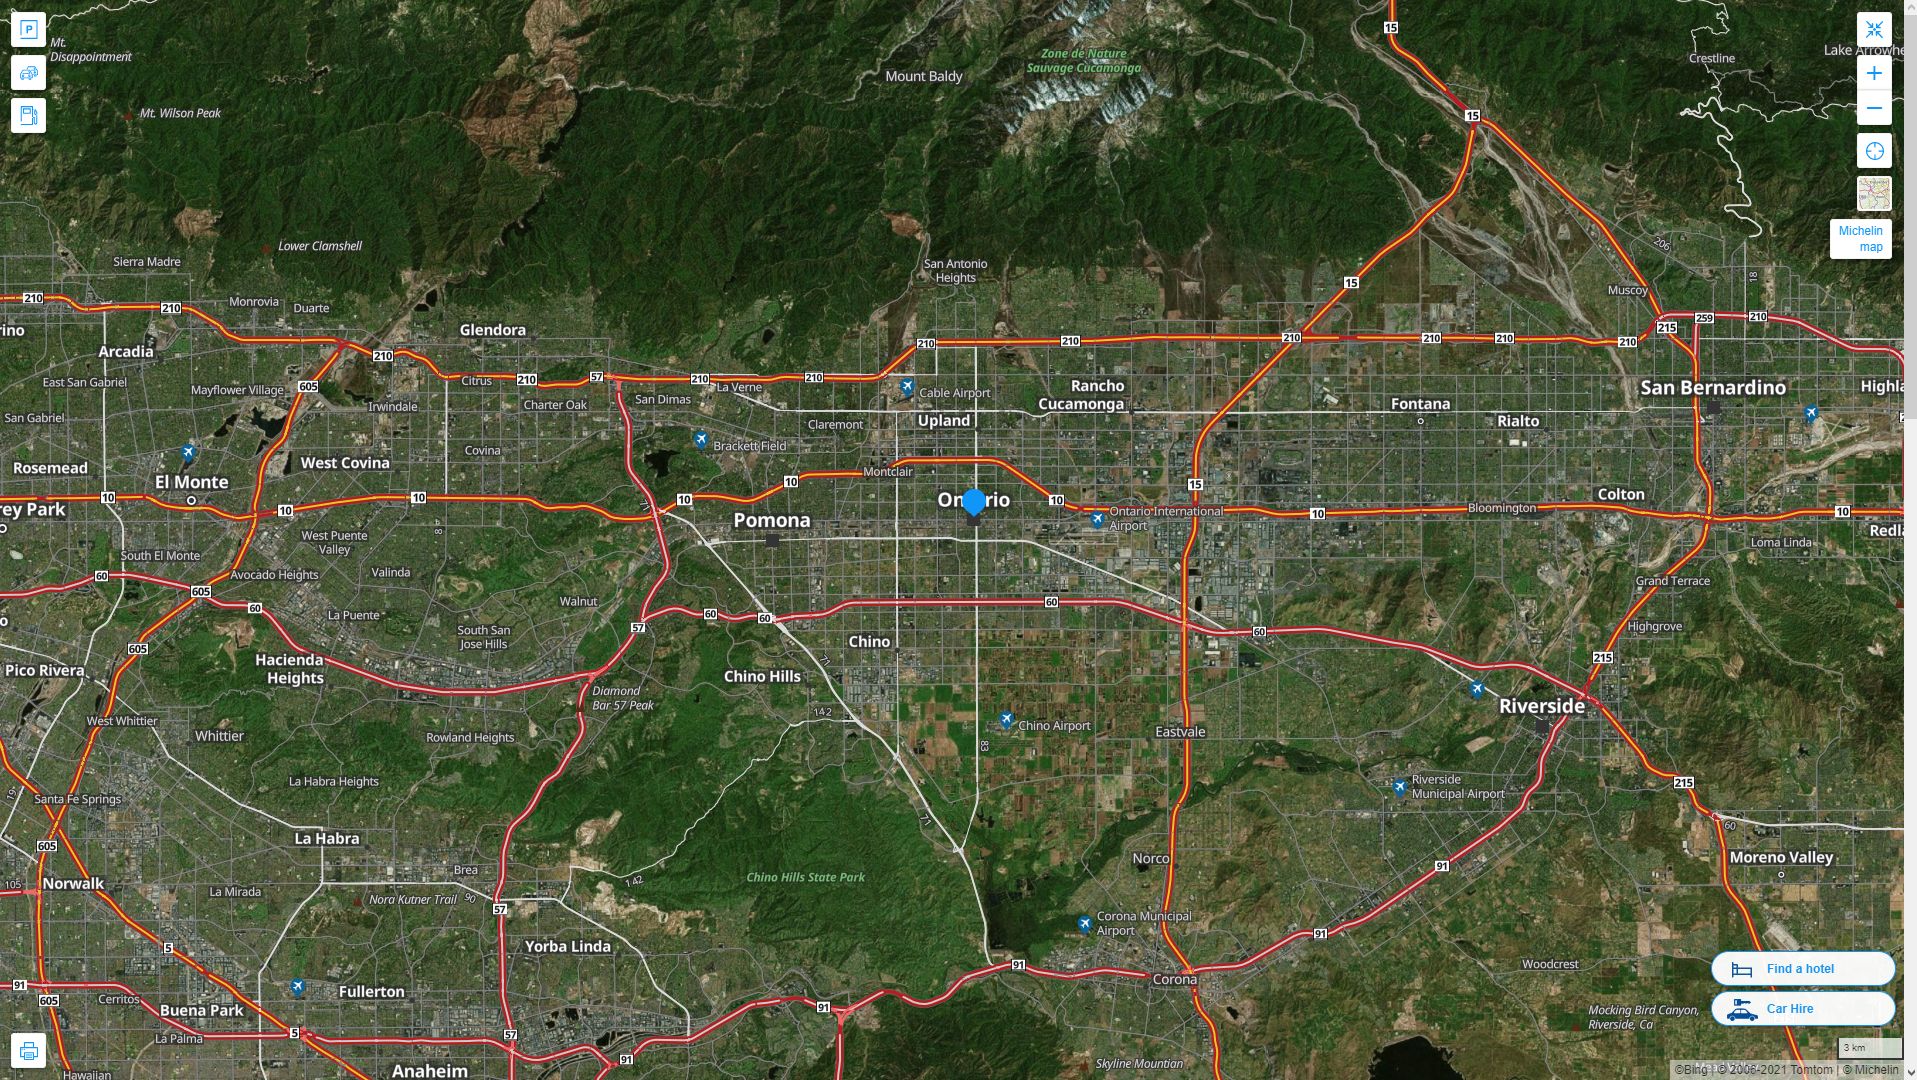 Ontario California Highway and Road Map with Satellite View